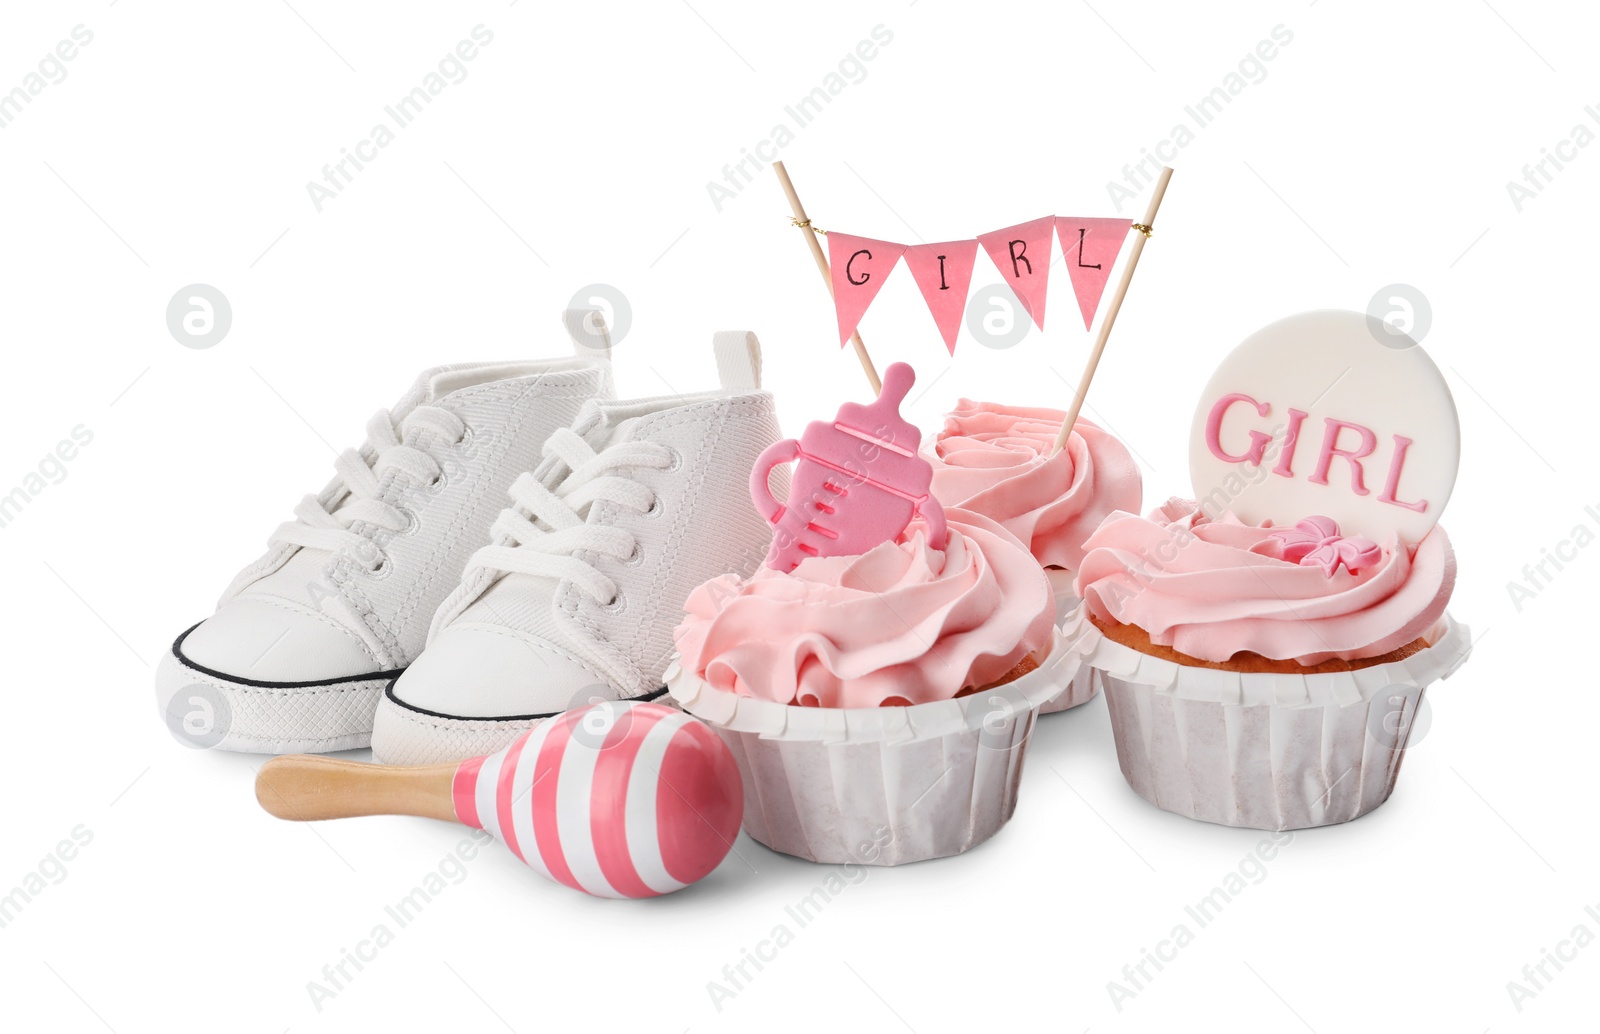 Photo of Baby shower cupcakes with toppers near shoes and toy on white background